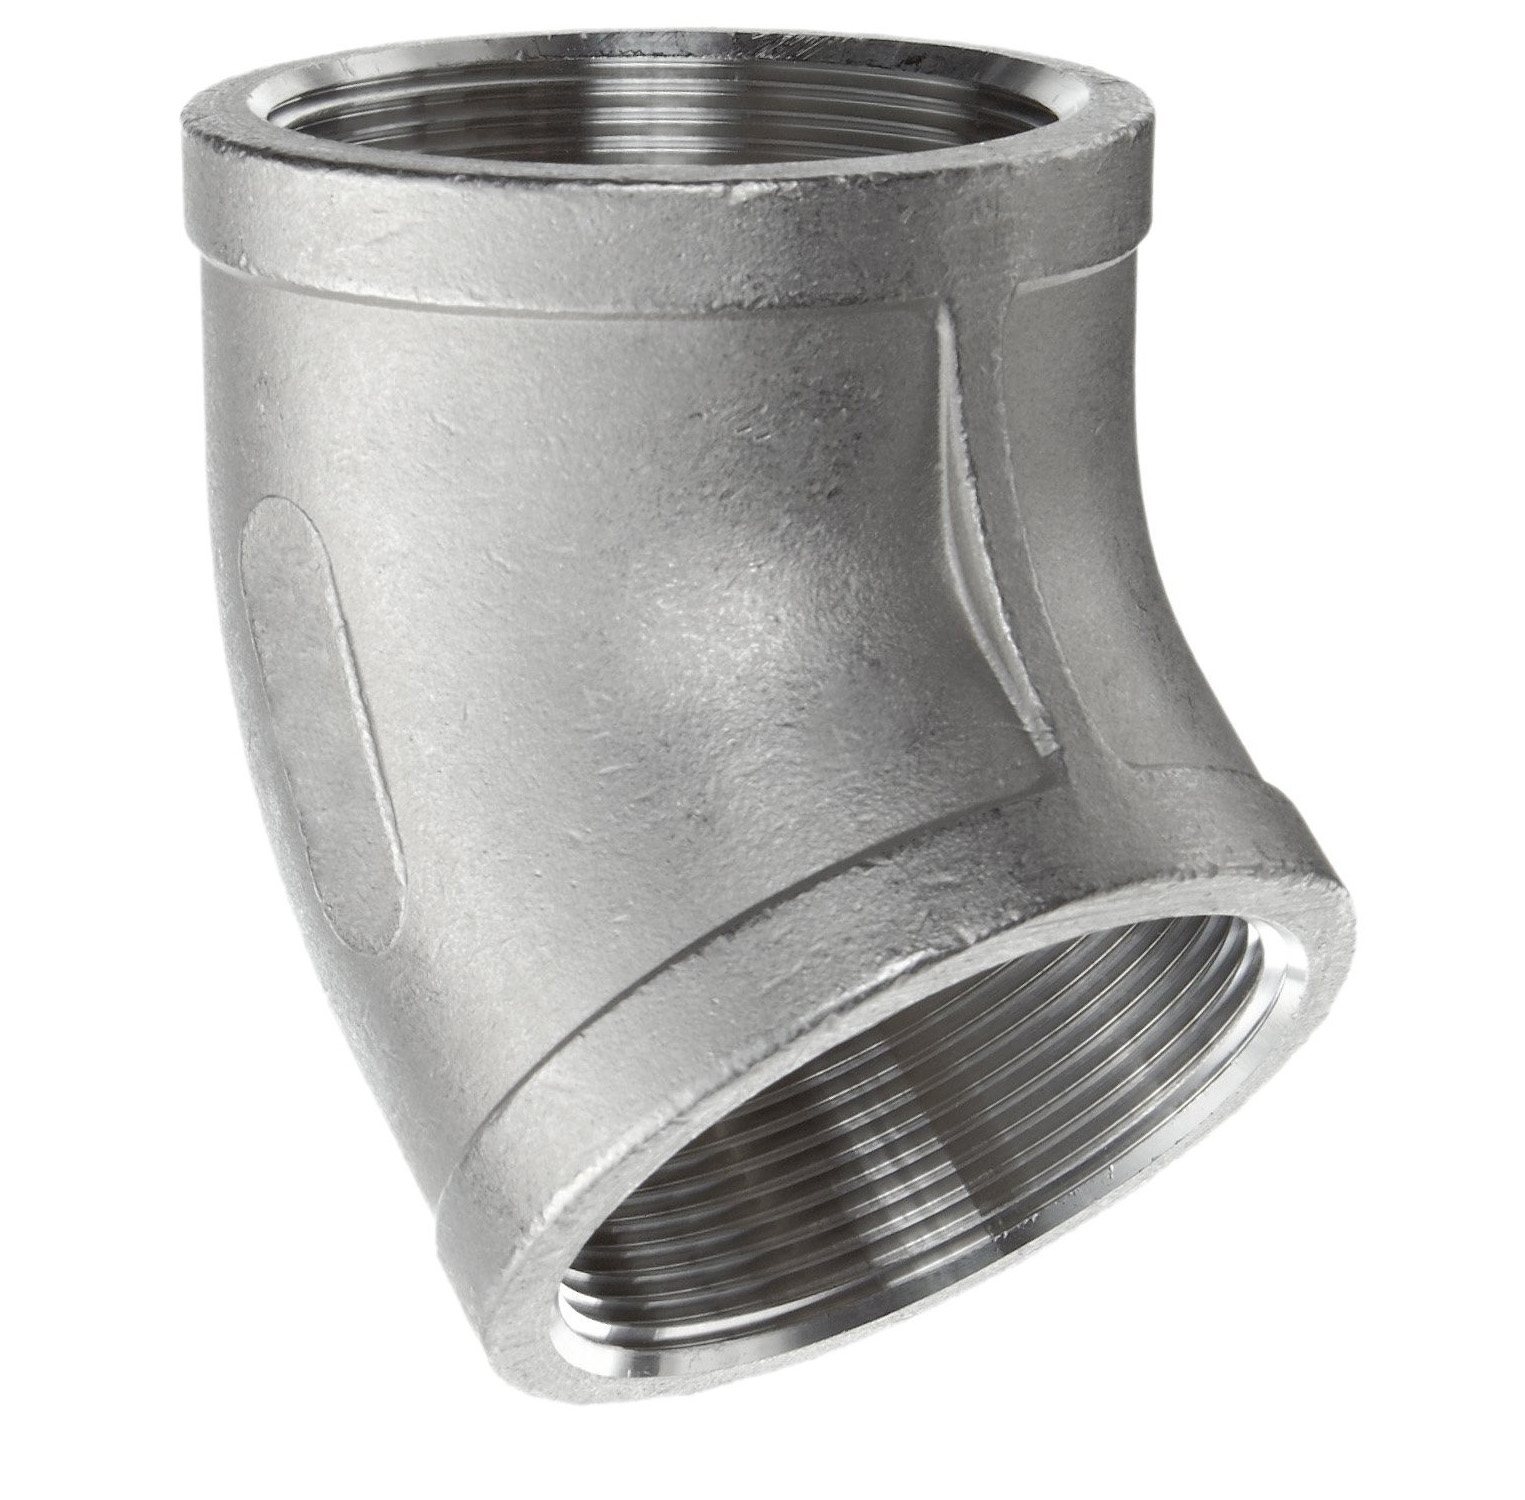 150 lb Stainless Steel Cast 45 Degree Elbows